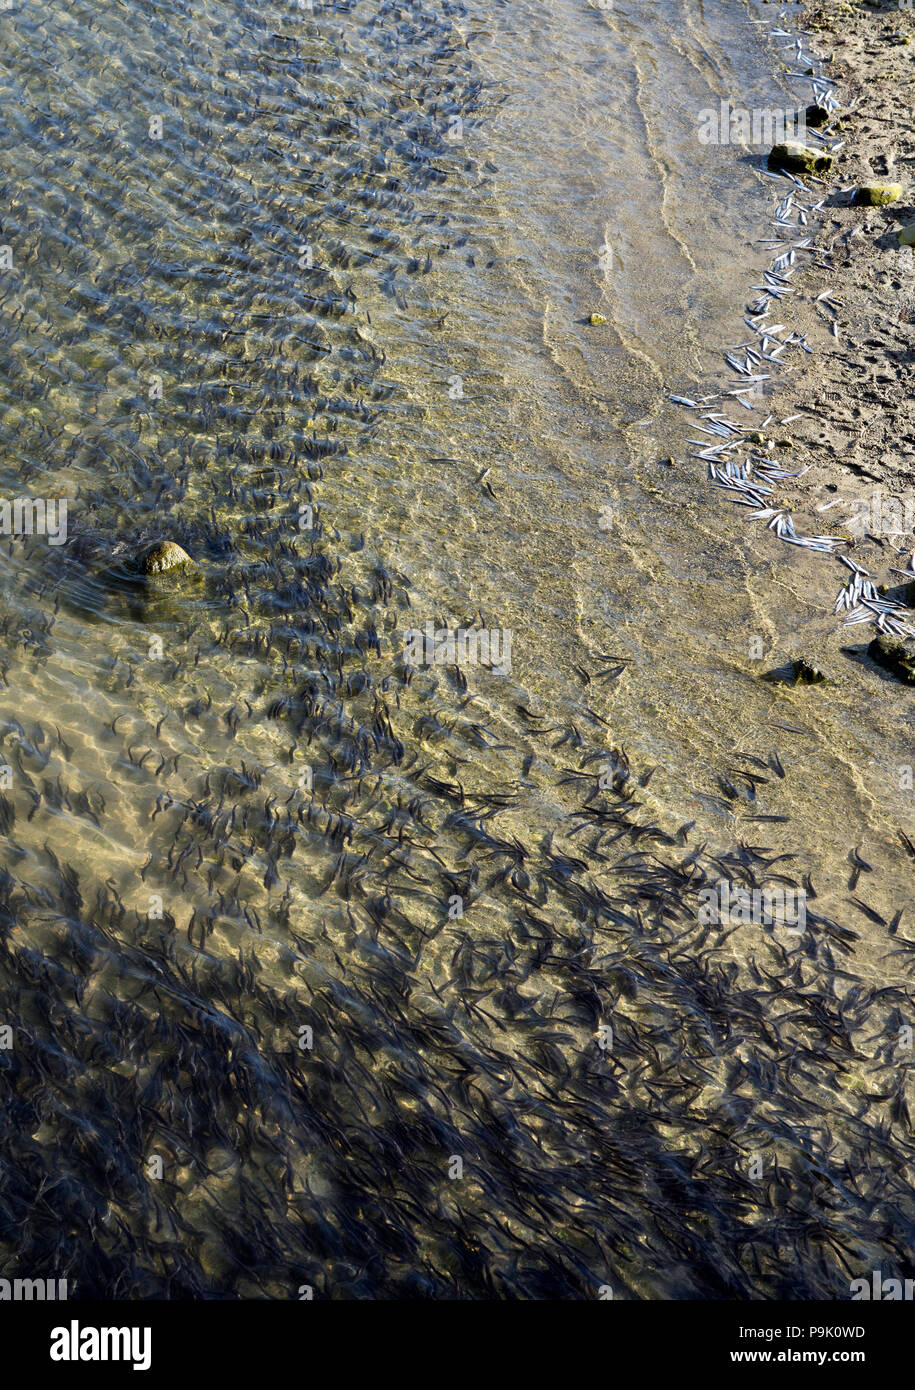 Spring run of Hooligan (Eulachon, smelt) in the Chilkoot River near Haines Alaska. Stock Photo